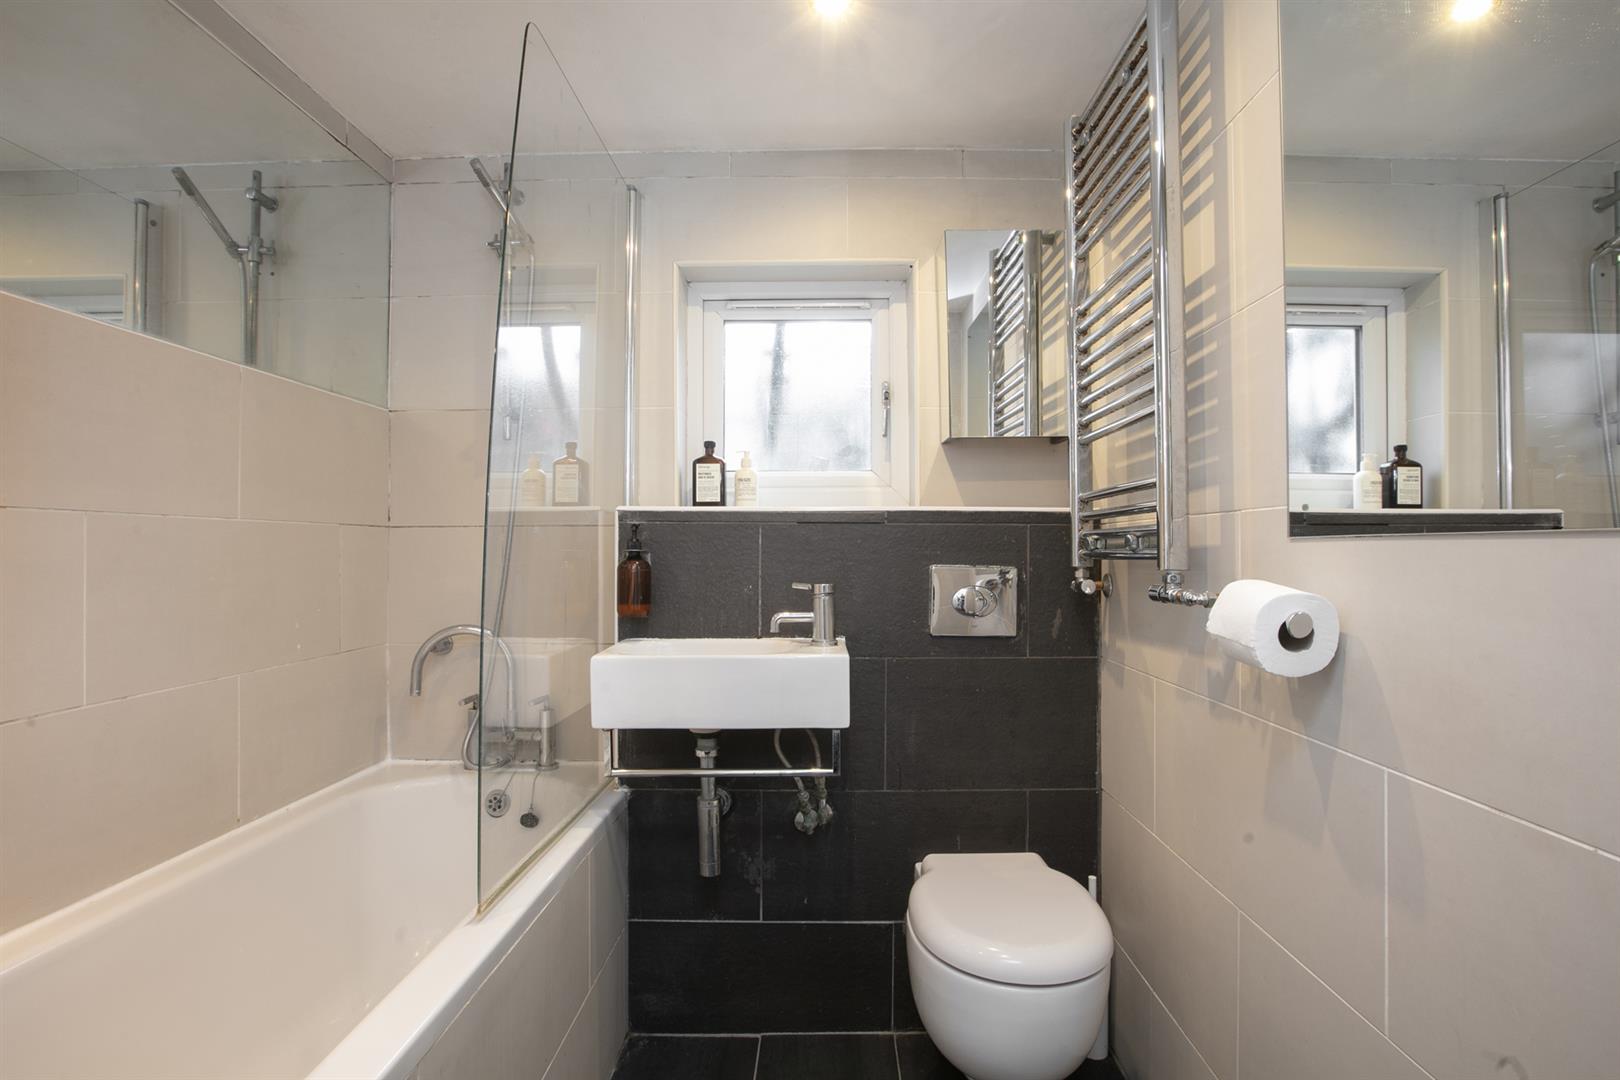 Flat - Conversion For Sale in Consort Road, Nunhead, SE15 1183 view16